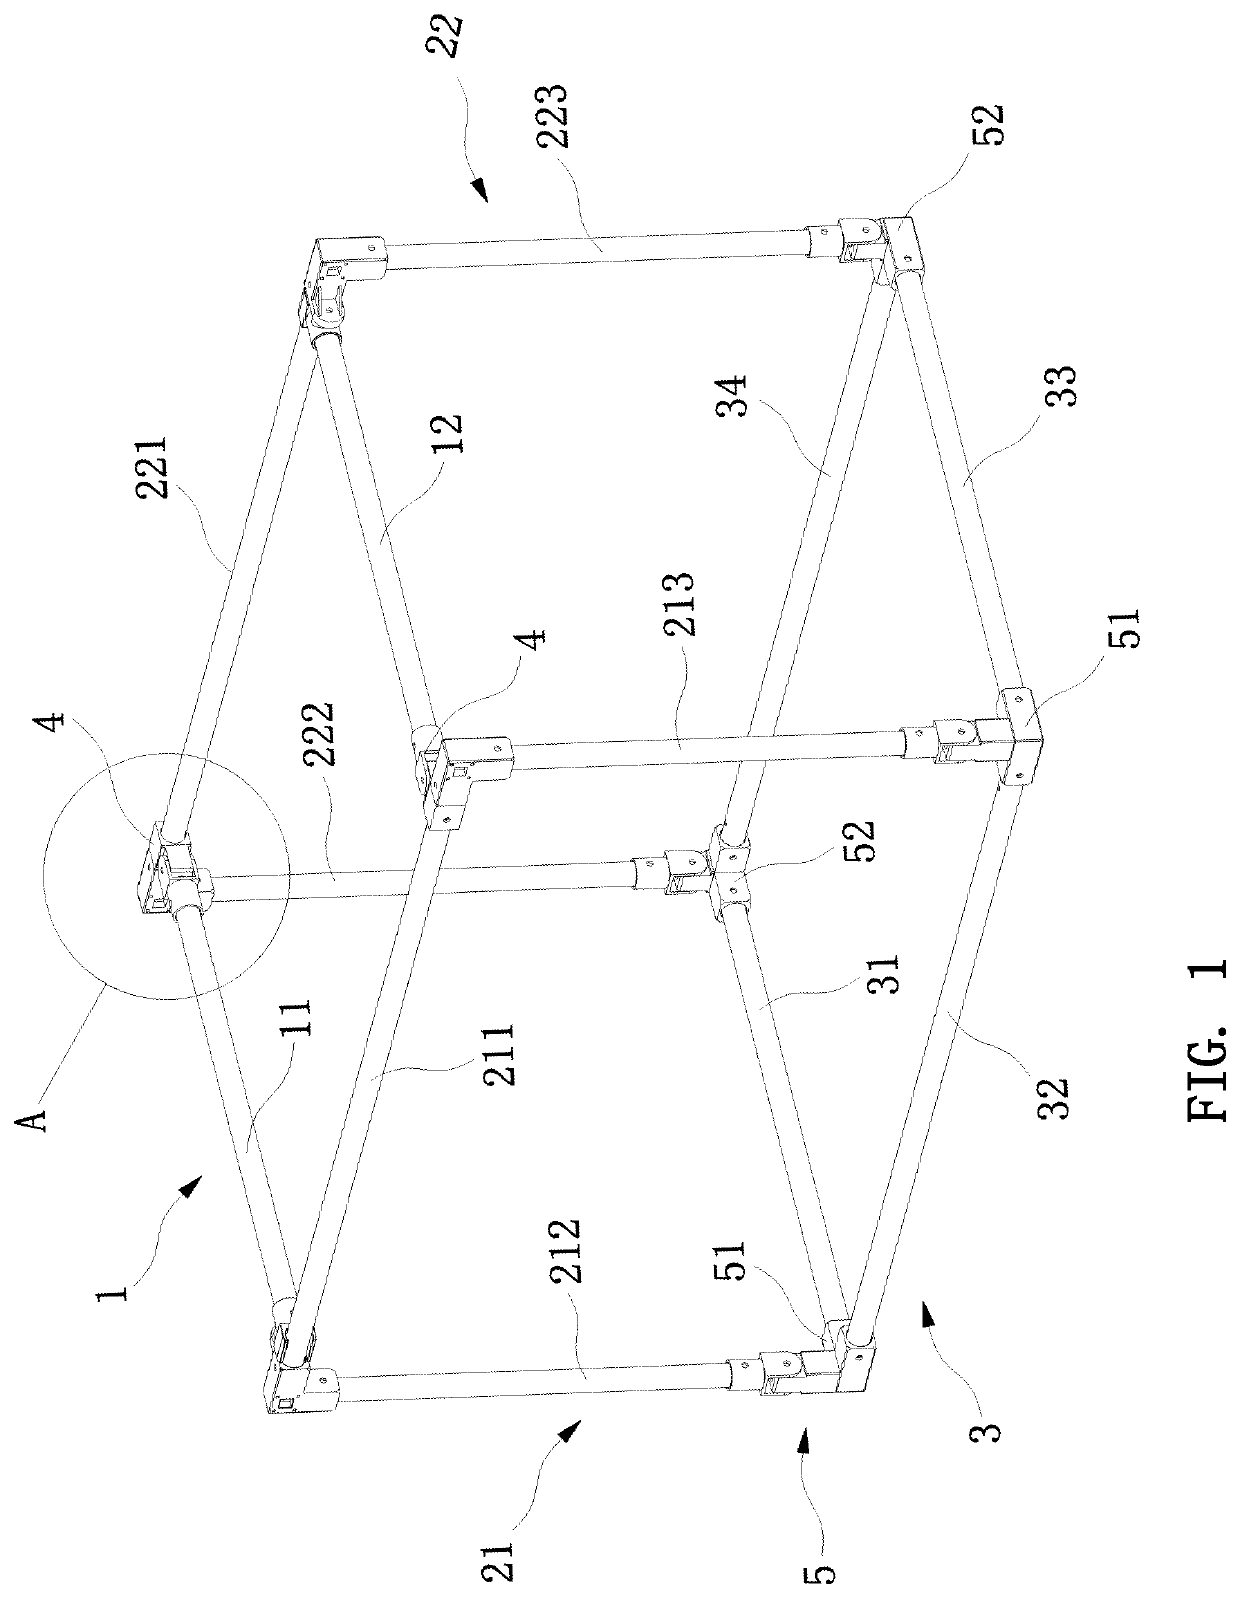 Pet tent support structure